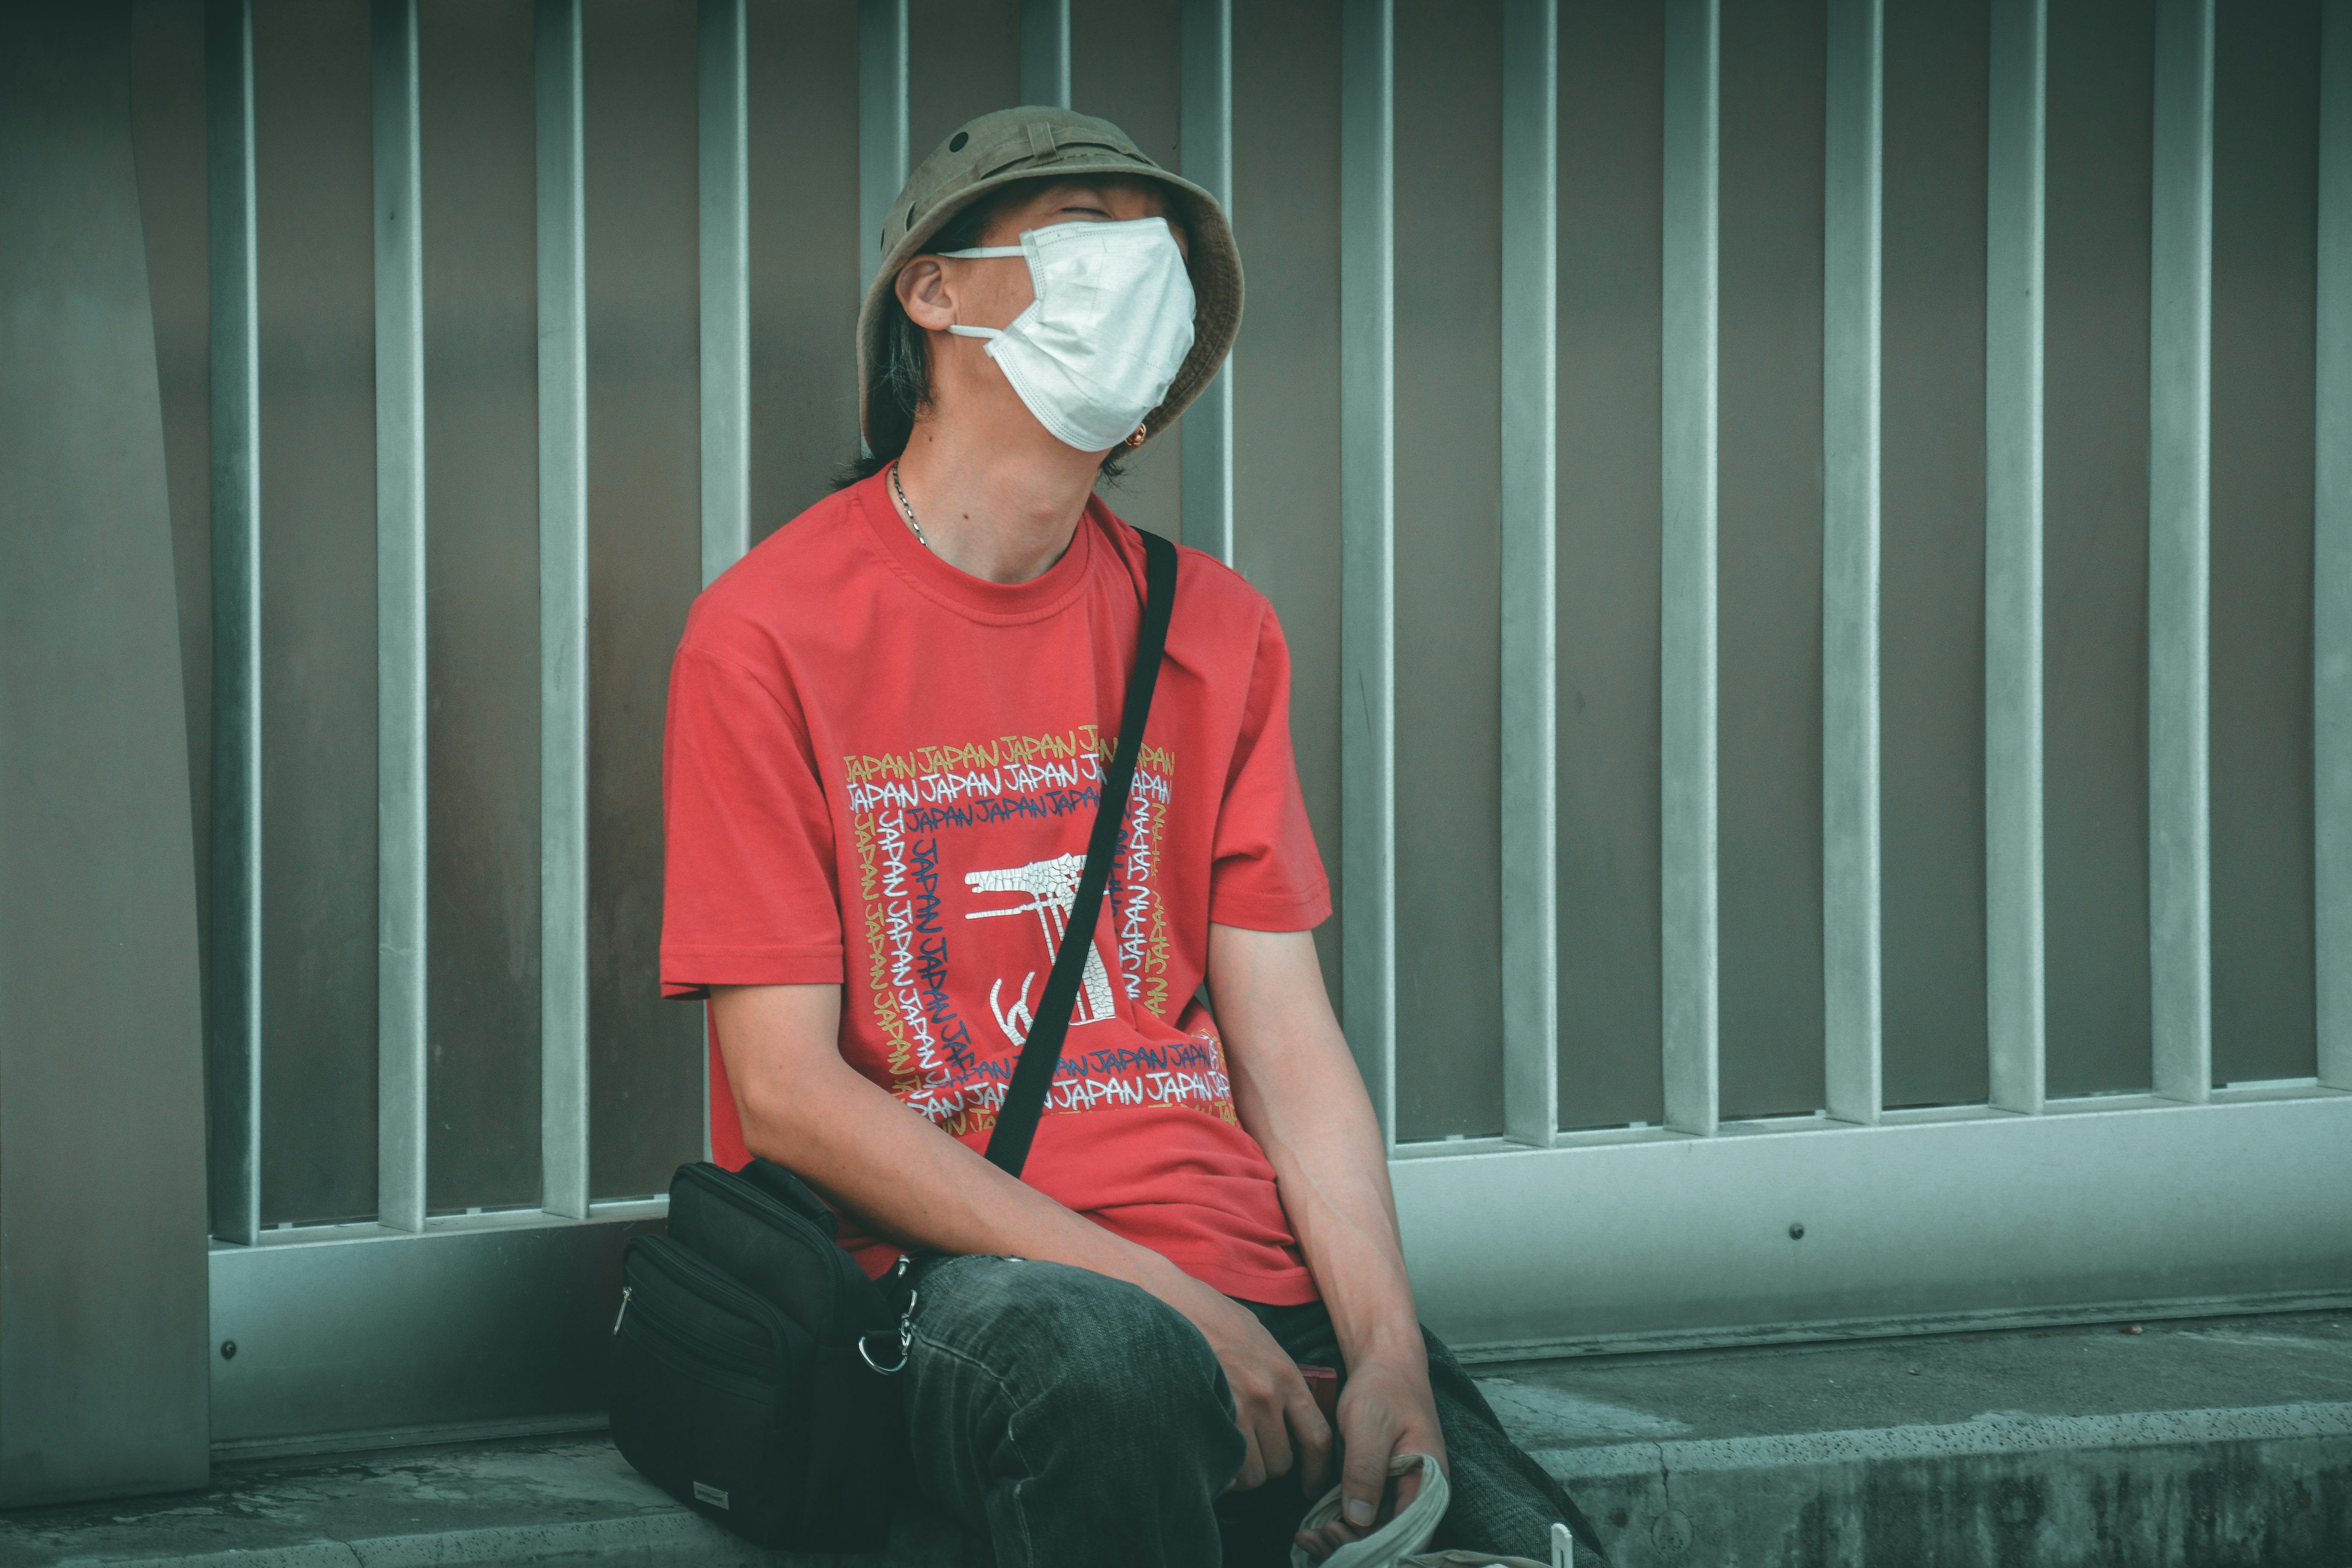 Street person wearing a sanitary mask 